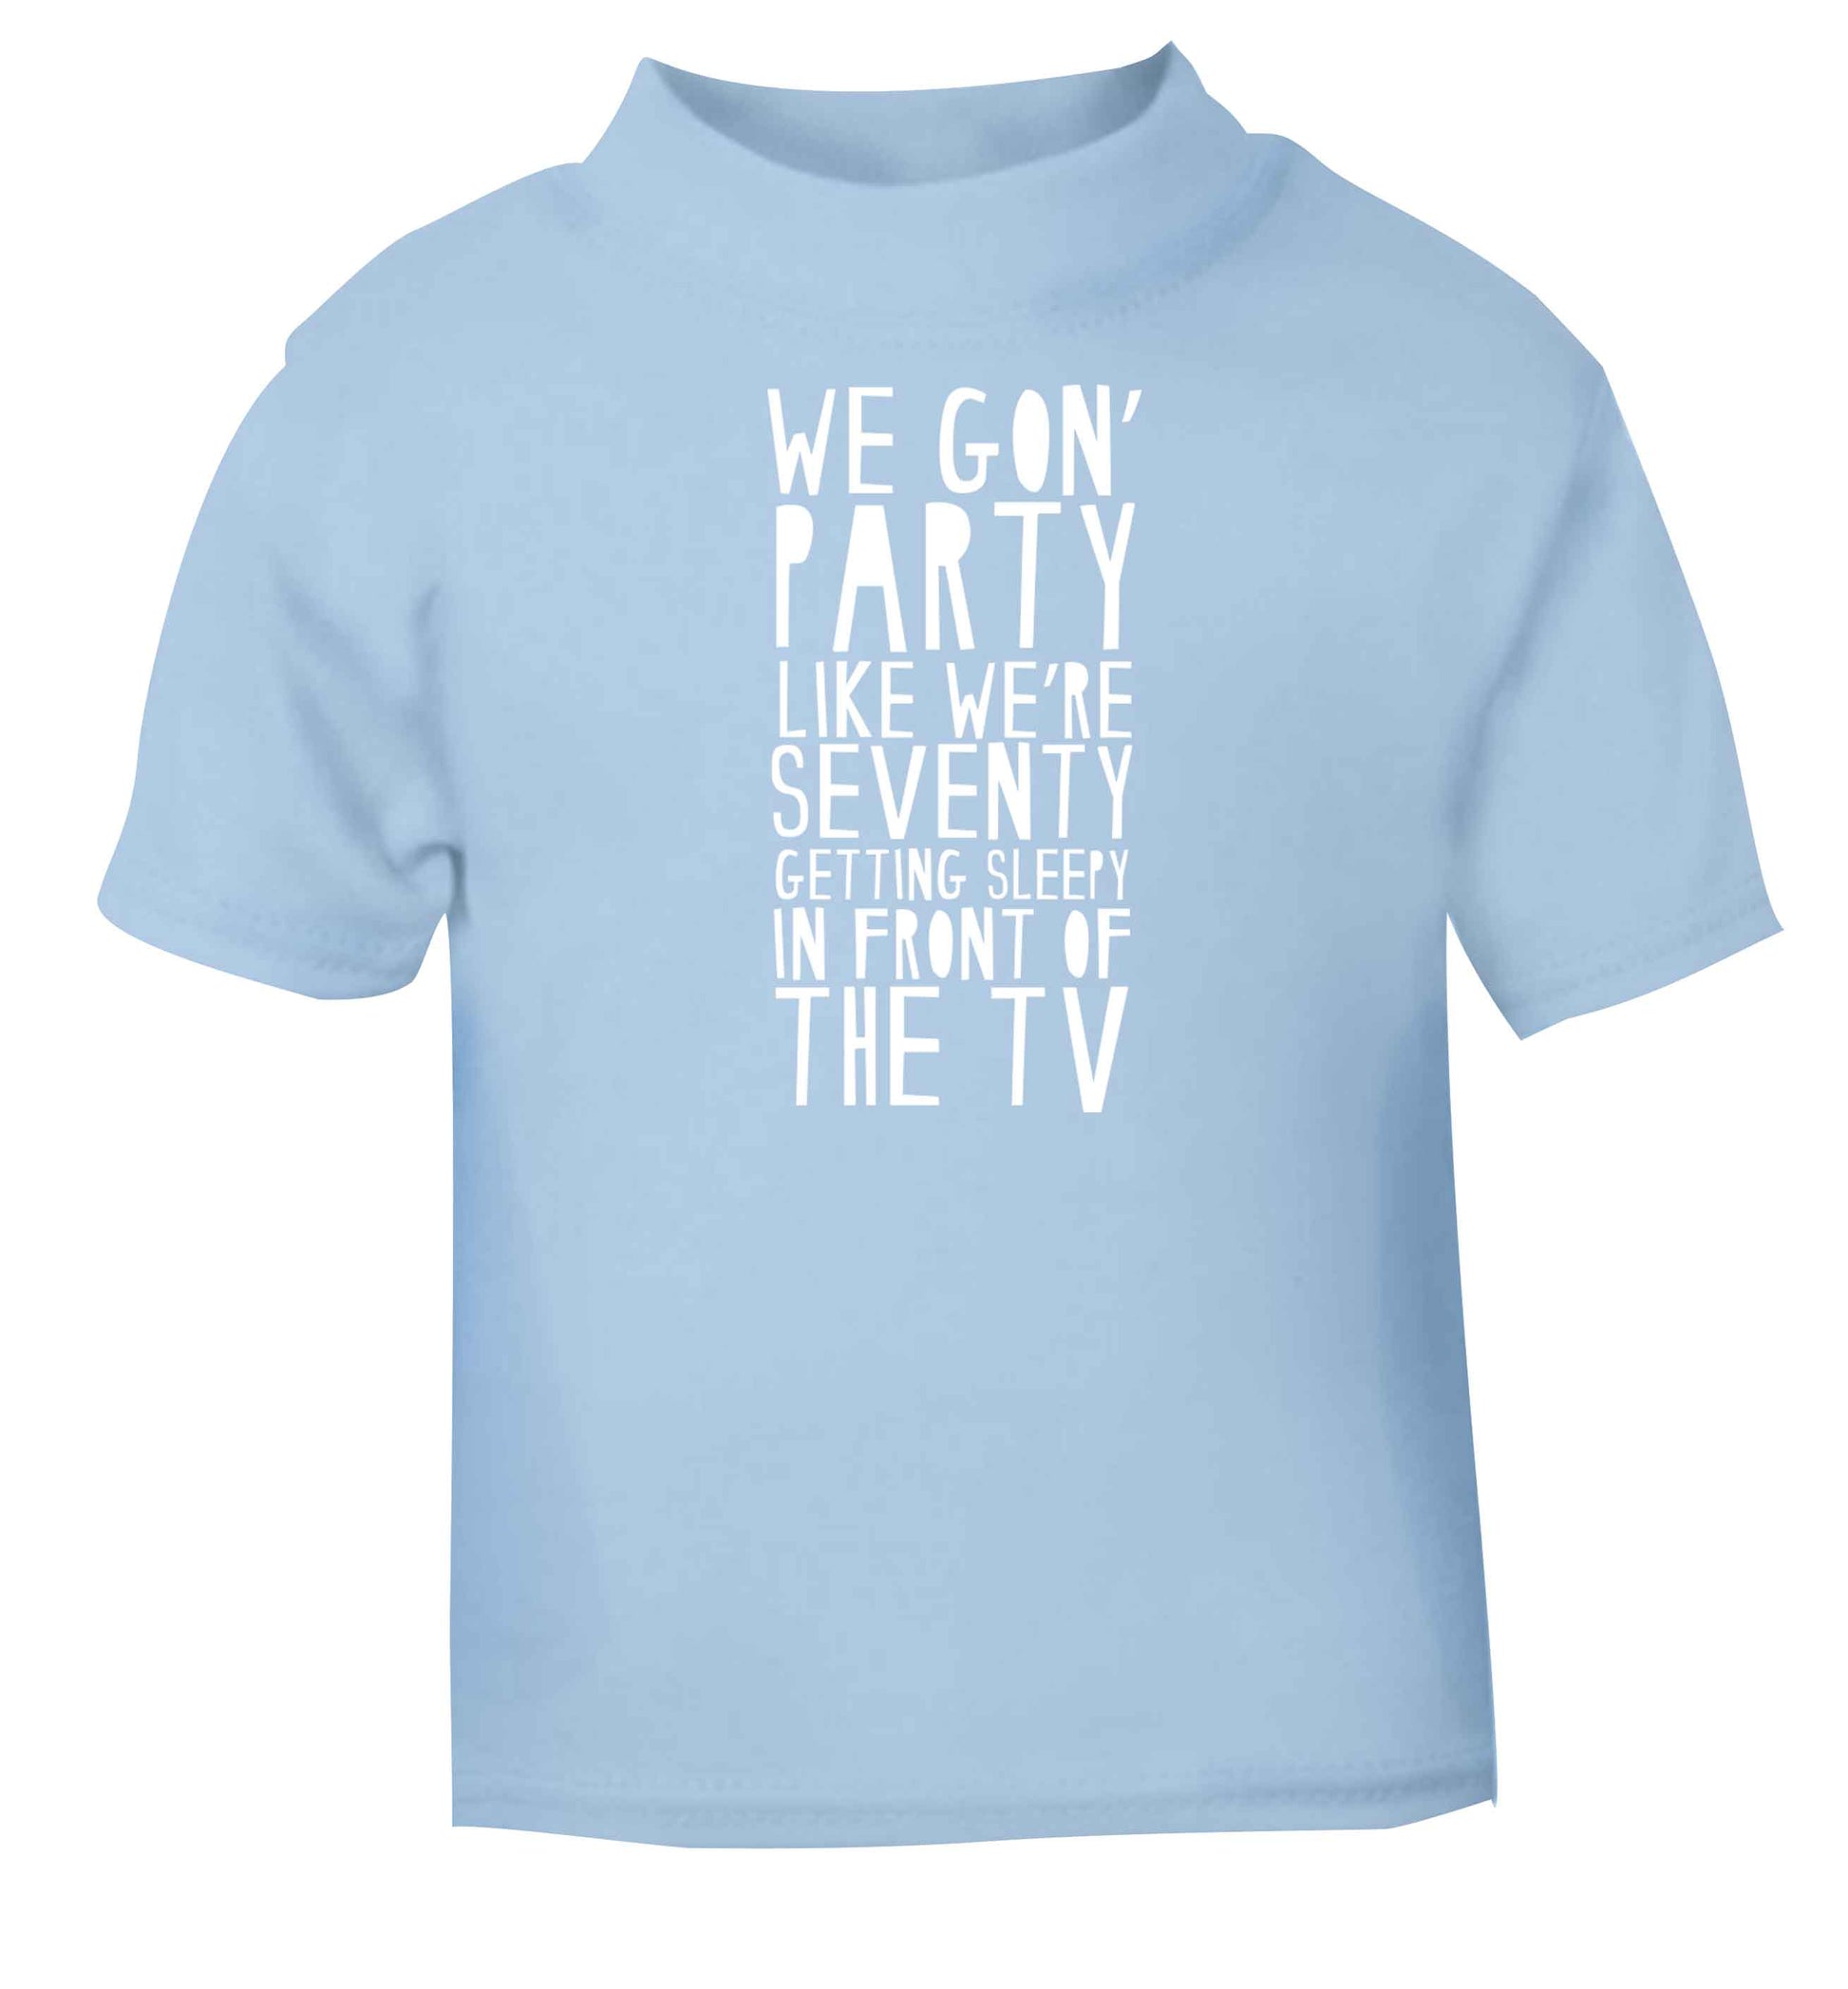 We gon' party like we're seventy getting sleepy in front of the TV light blue baby toddler Tshirt 2 Years